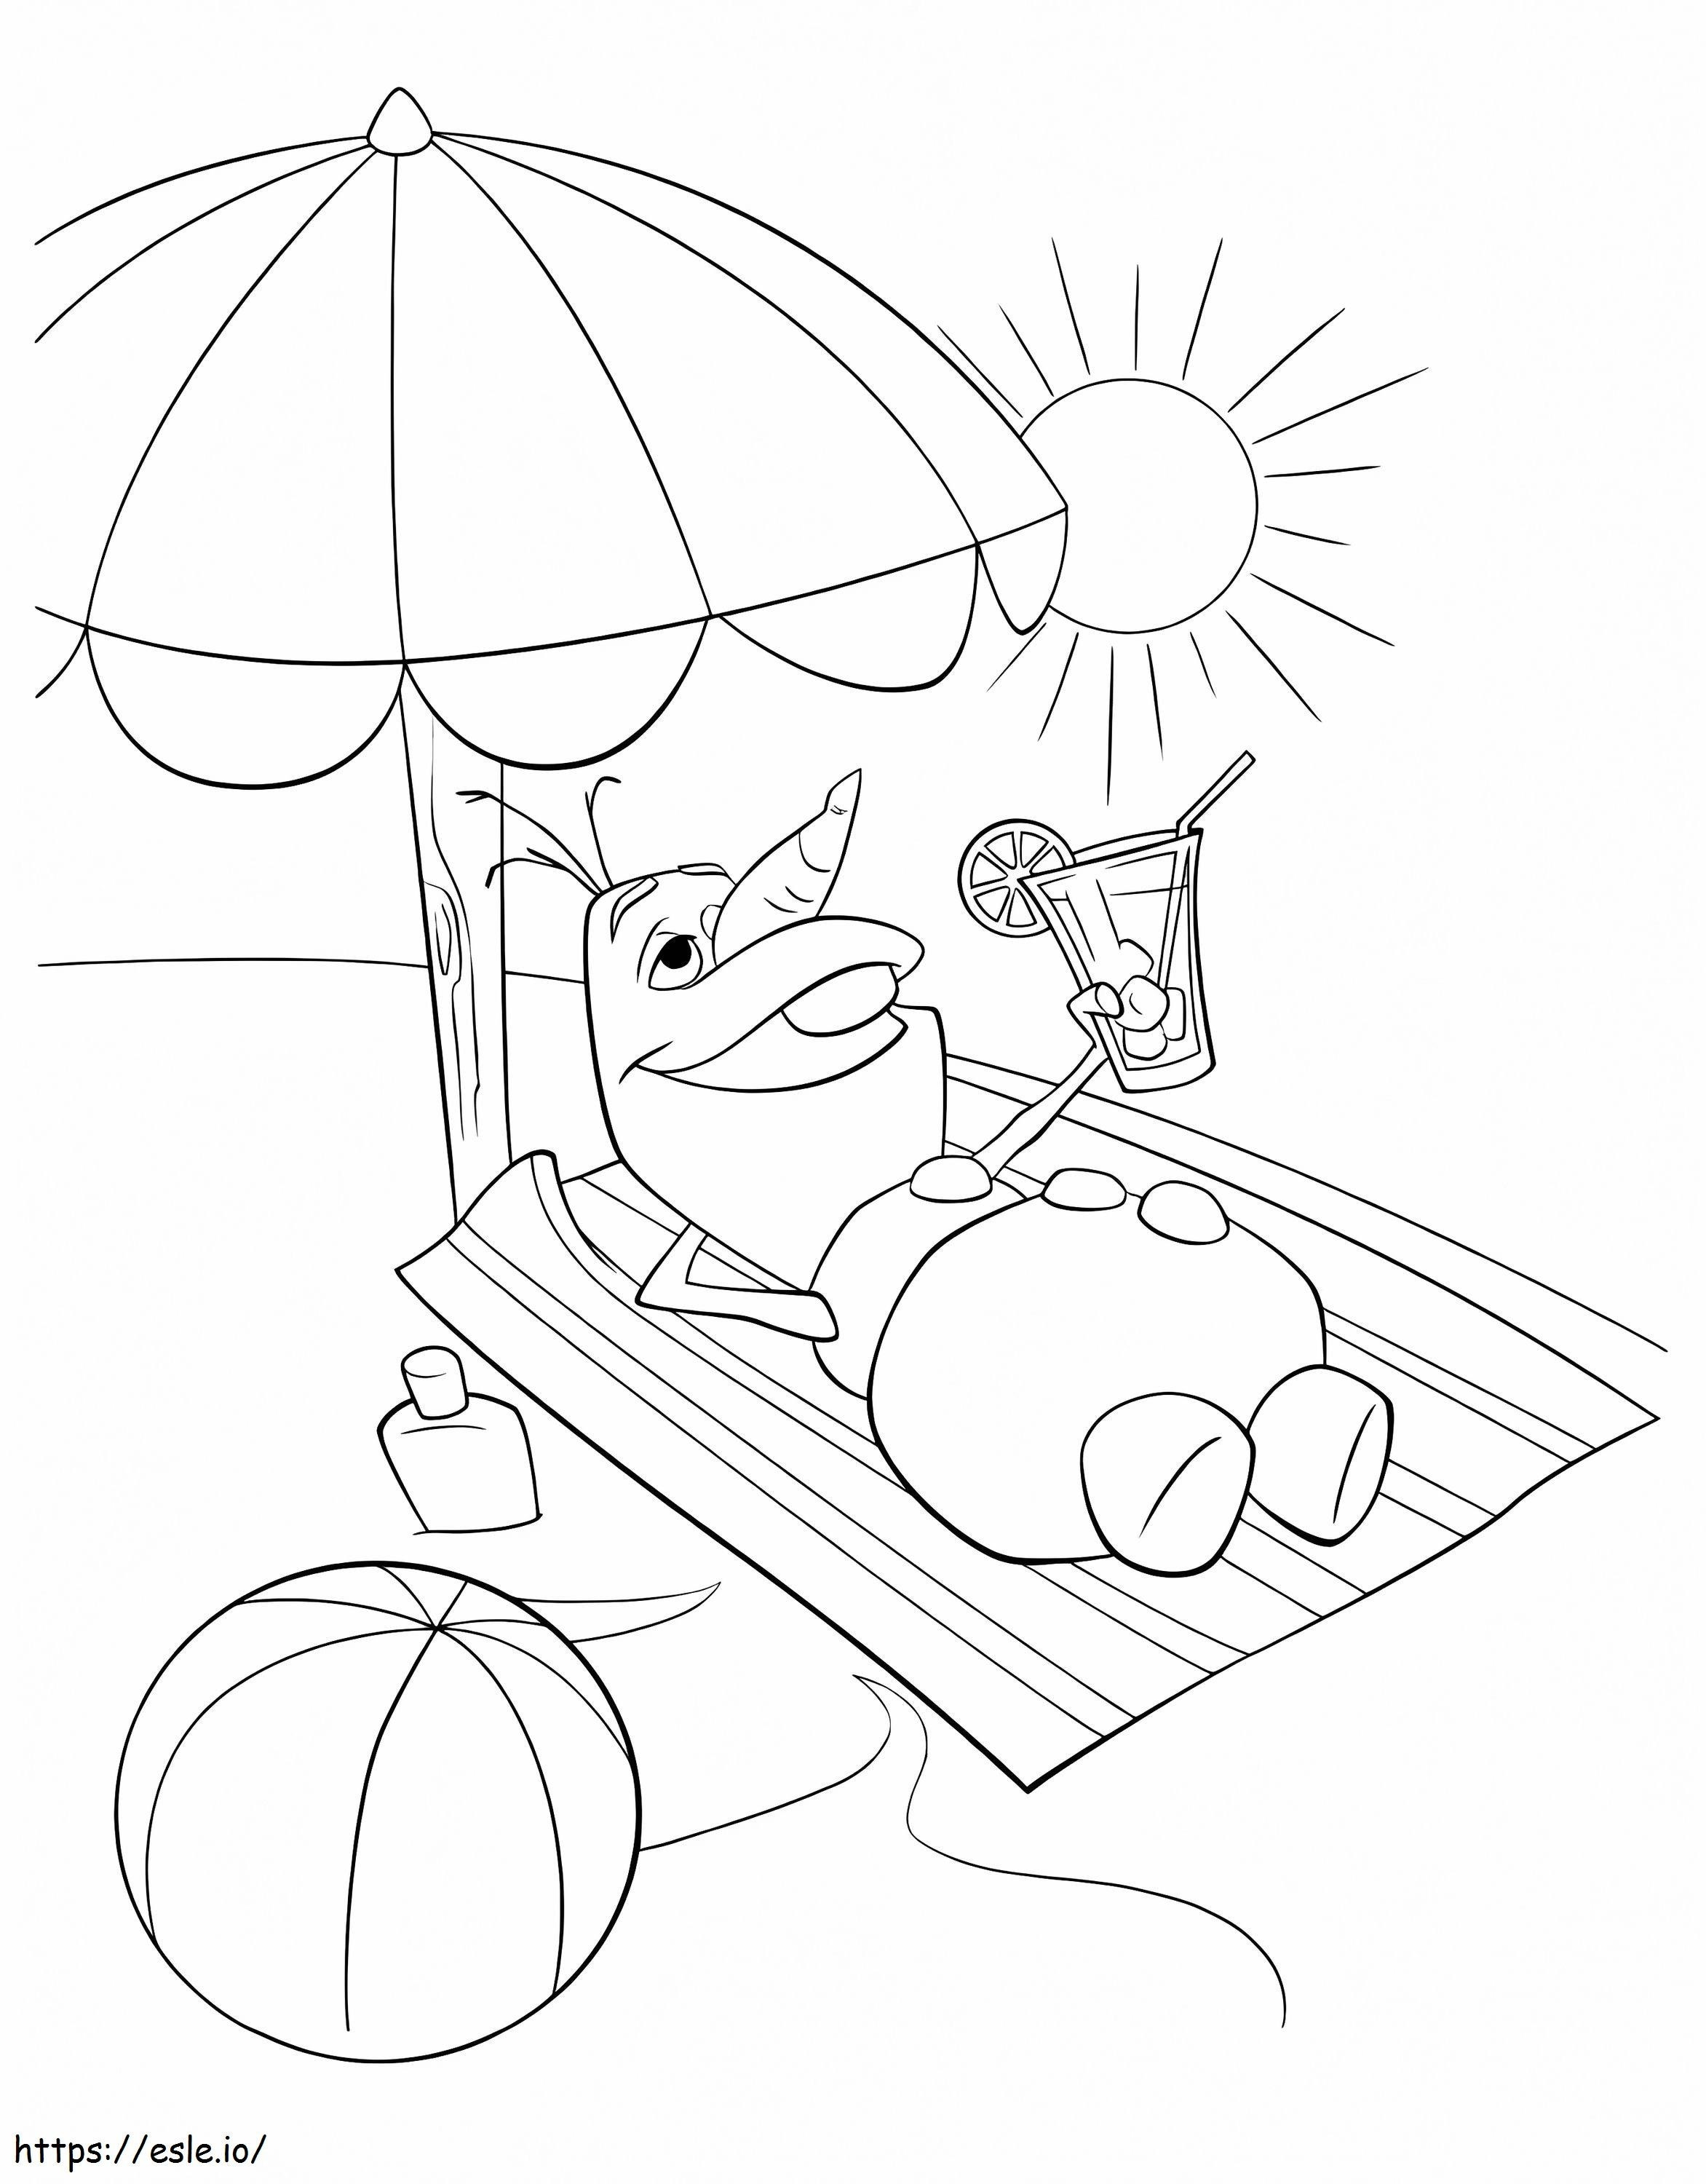 Olaf On The Beach coloring page